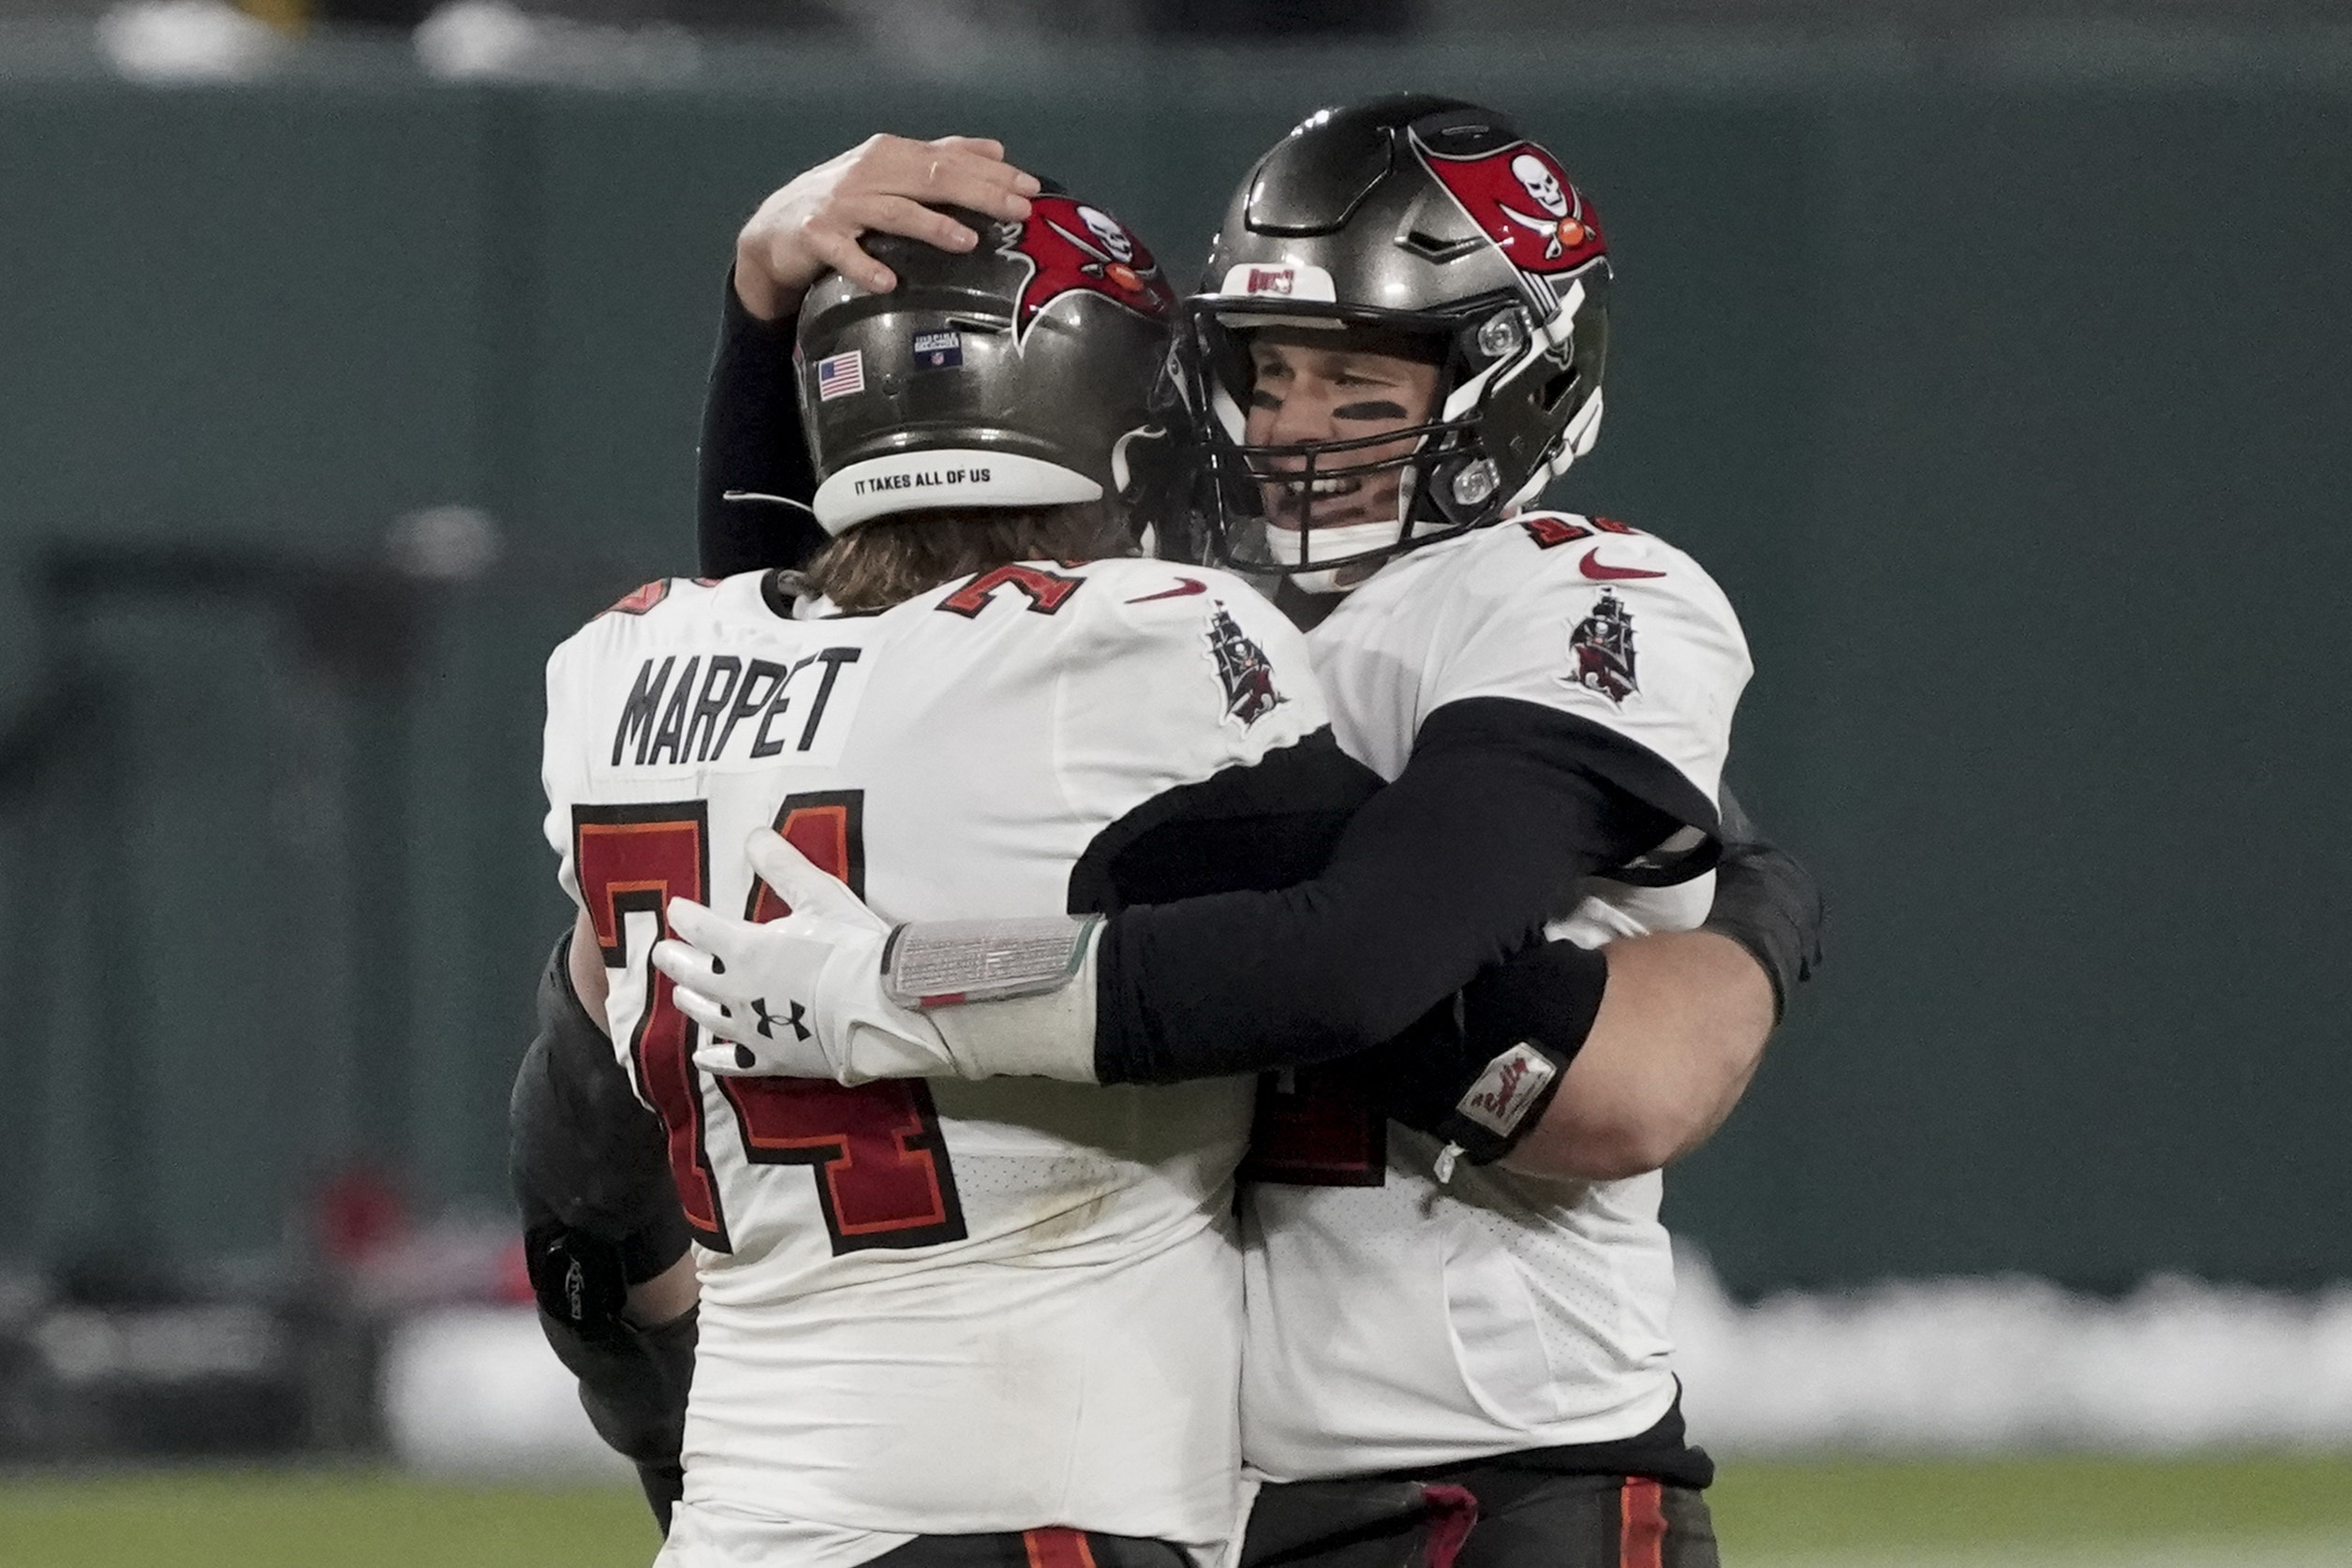 Buccaneers make history as first team to win Super Bowl at home